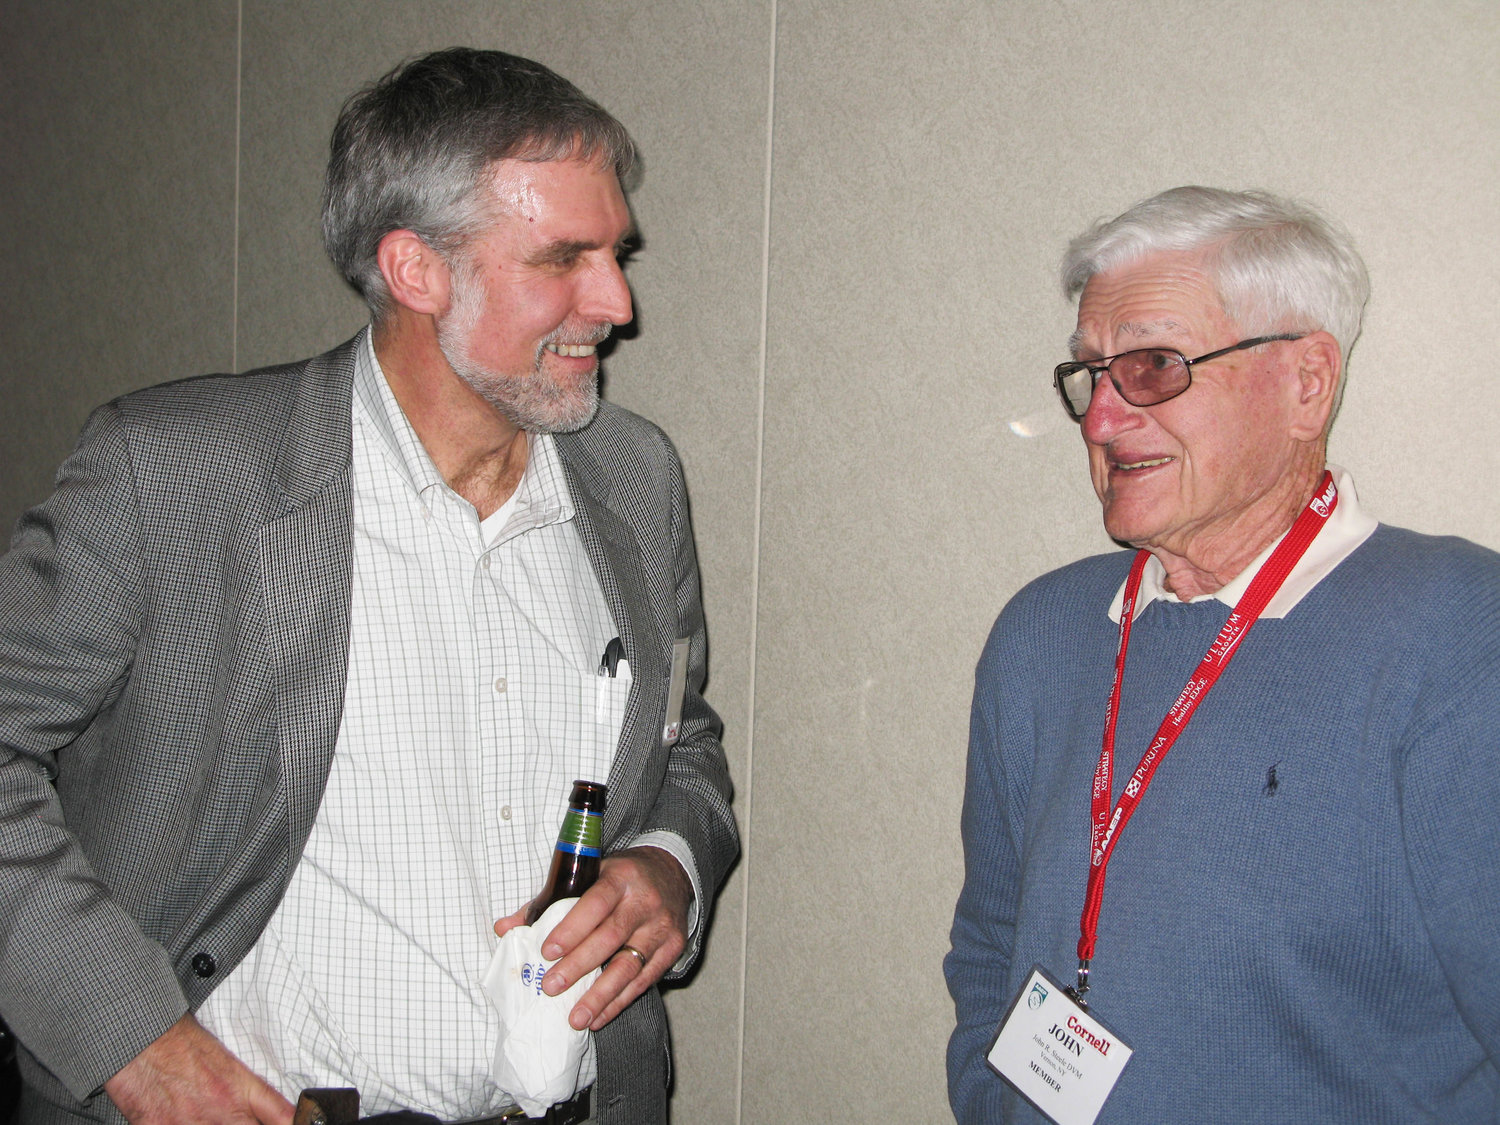 Dirk Vanderwall (left) visits with Dr. John Steele (right) during a Cornell Veterinary School reception at a veterinary conference in 2010. Steele was a veterinarian at Steele Equine Clinic in Vernon who played an essential part in Vanderwall's career.